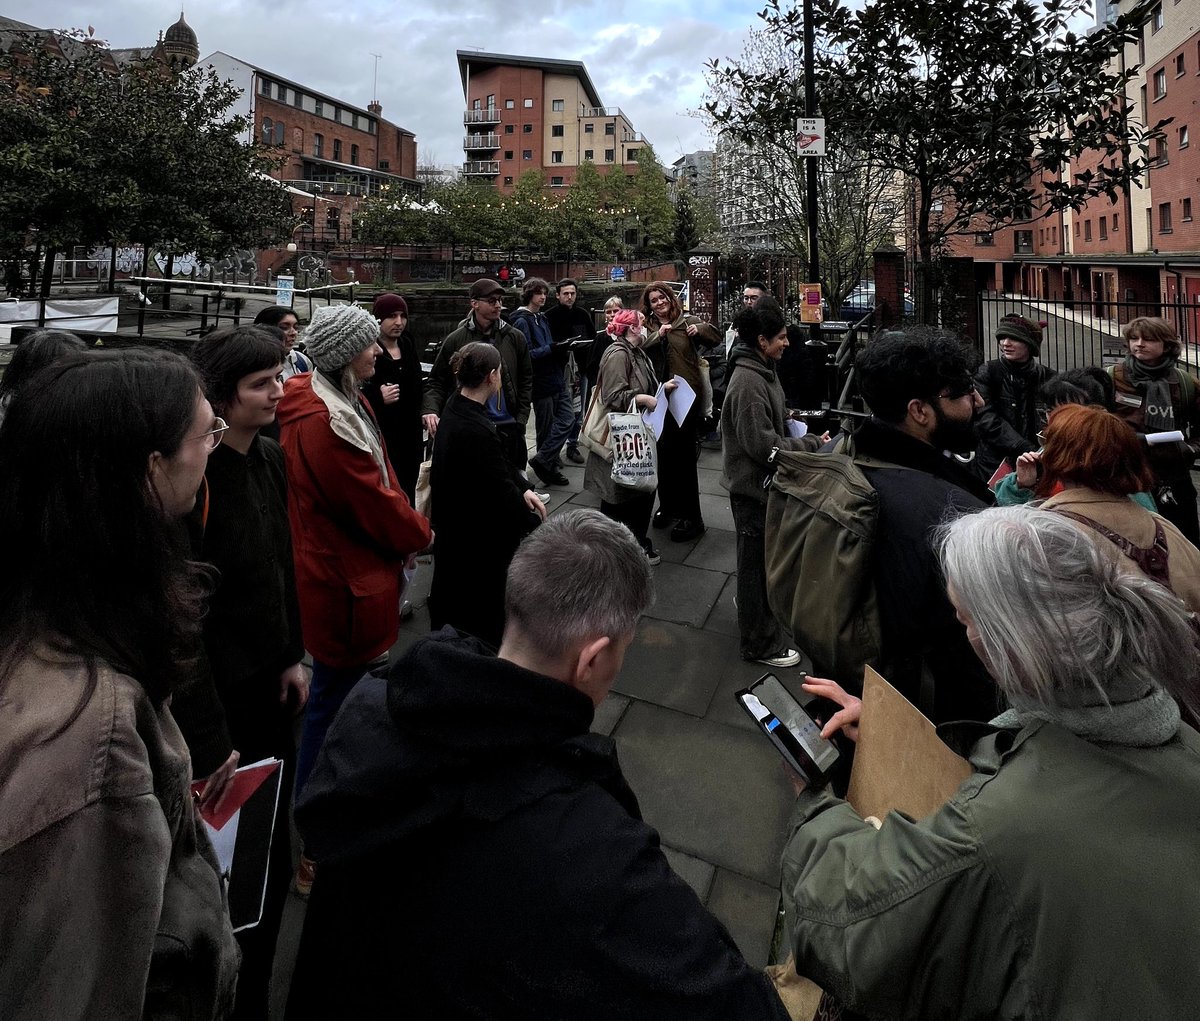 NEW: 100 Manchester artists and their helpers have gathered to remove their works en masse from this year’s @HOME_mcr exhibition in protest at the cancellation of Palestinian event, ‘Voices of Resilience’ Comes after 1000 people protested outside the venue on Saturday.